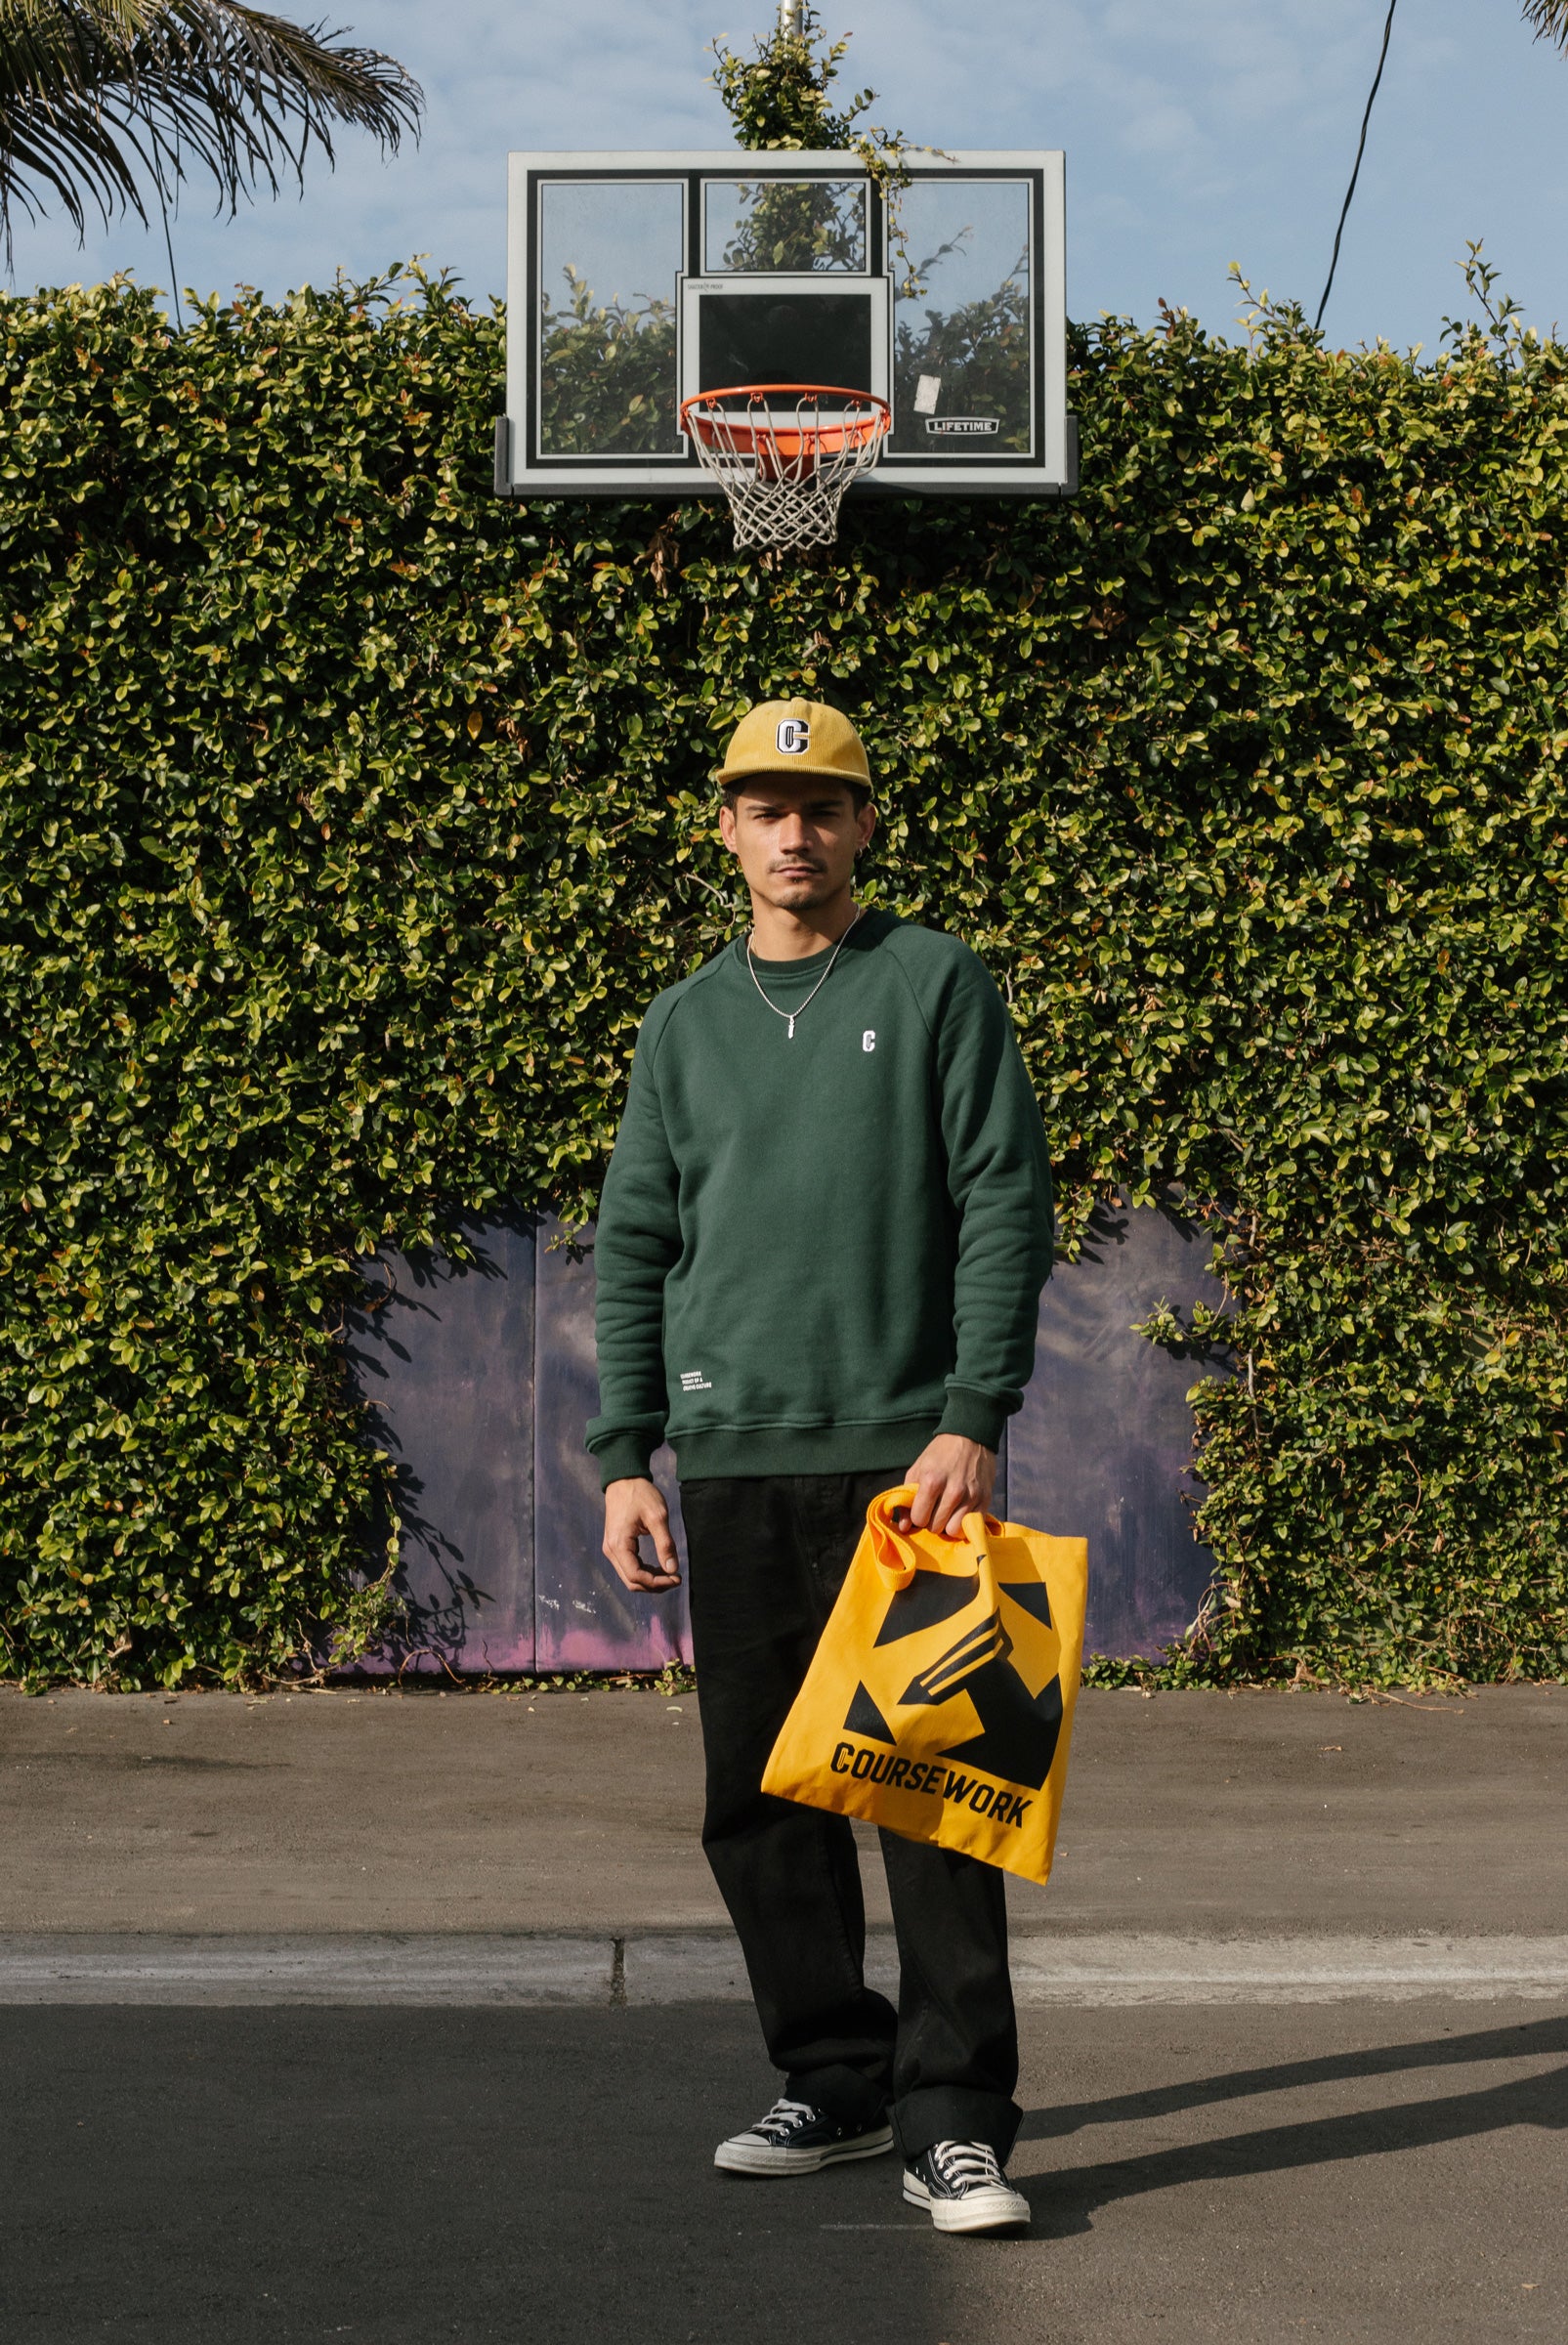 Model wearing the Varsity C Corduroy Cap in yellow and Icon Crewneck Sweatshirt in forest green and standing in front a basketball hoop and foliage..